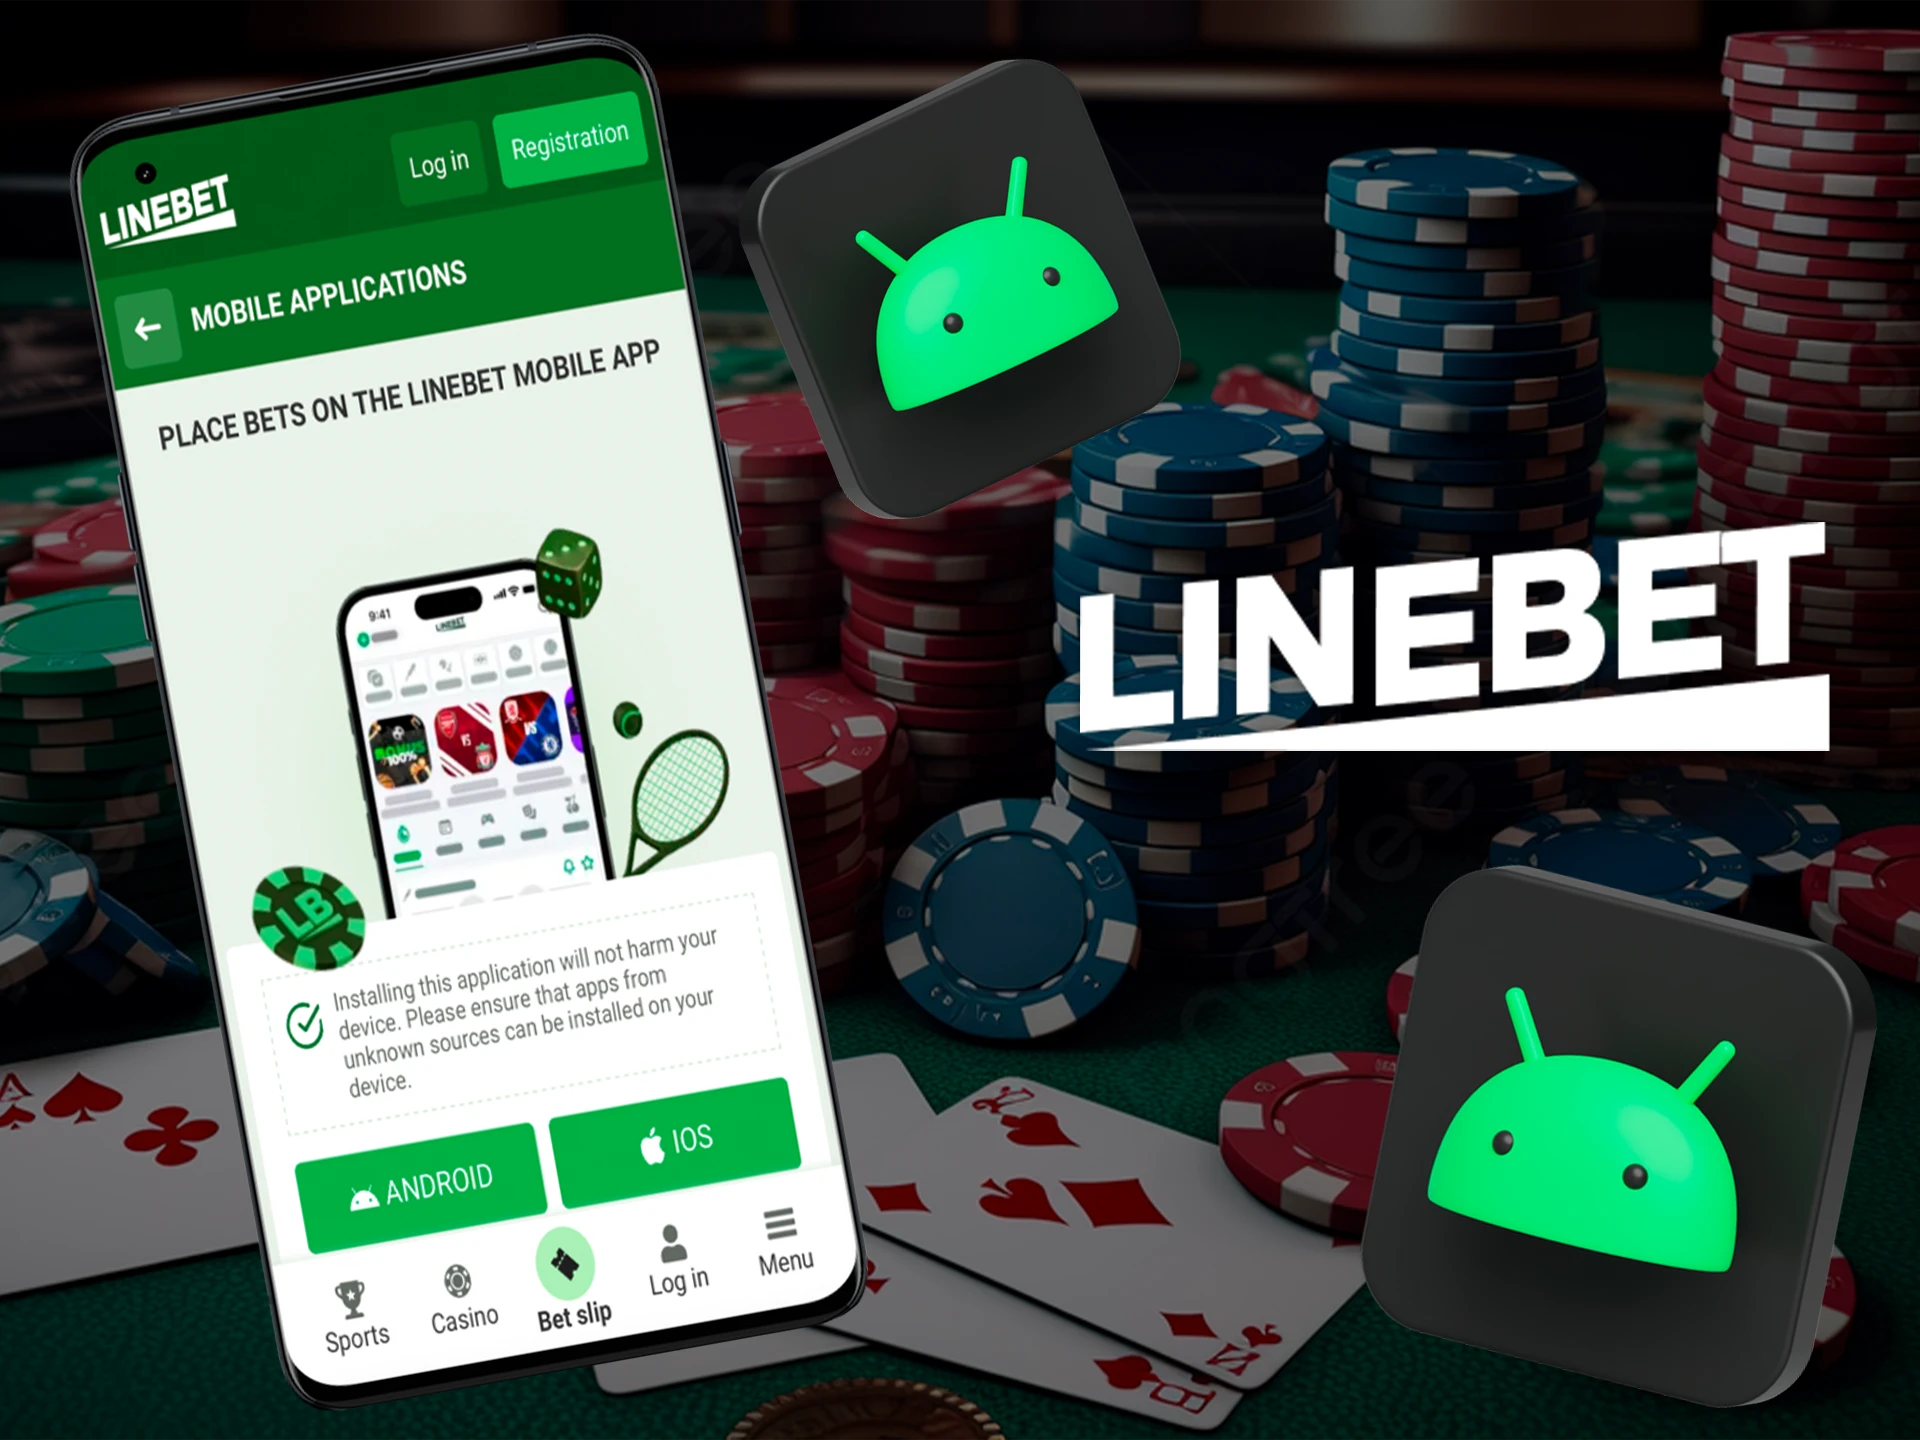 Win at Linebet casino on the Android app.